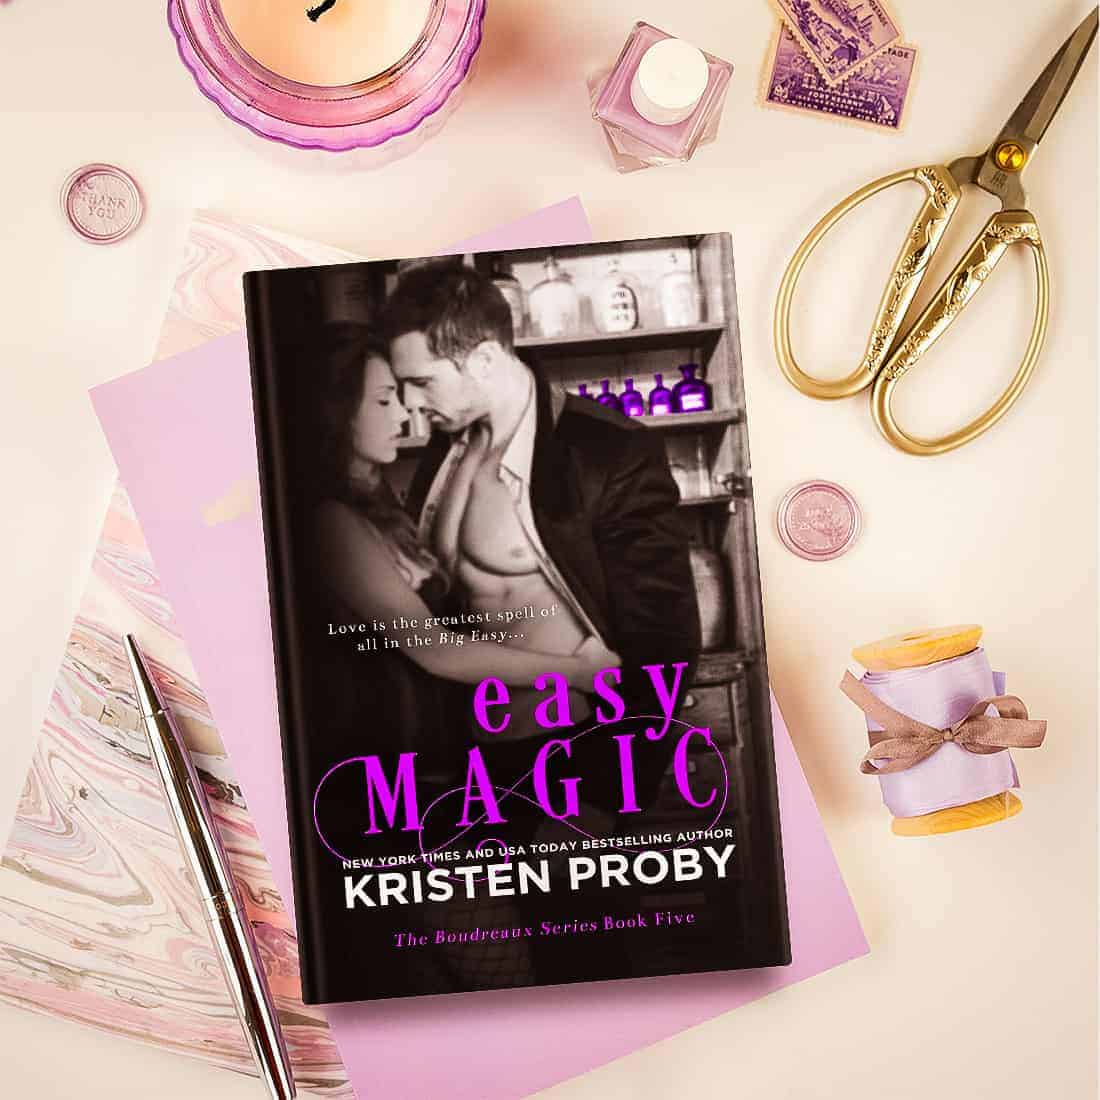 Easy Magic by Kristen Proby – Boudreaux Book 5